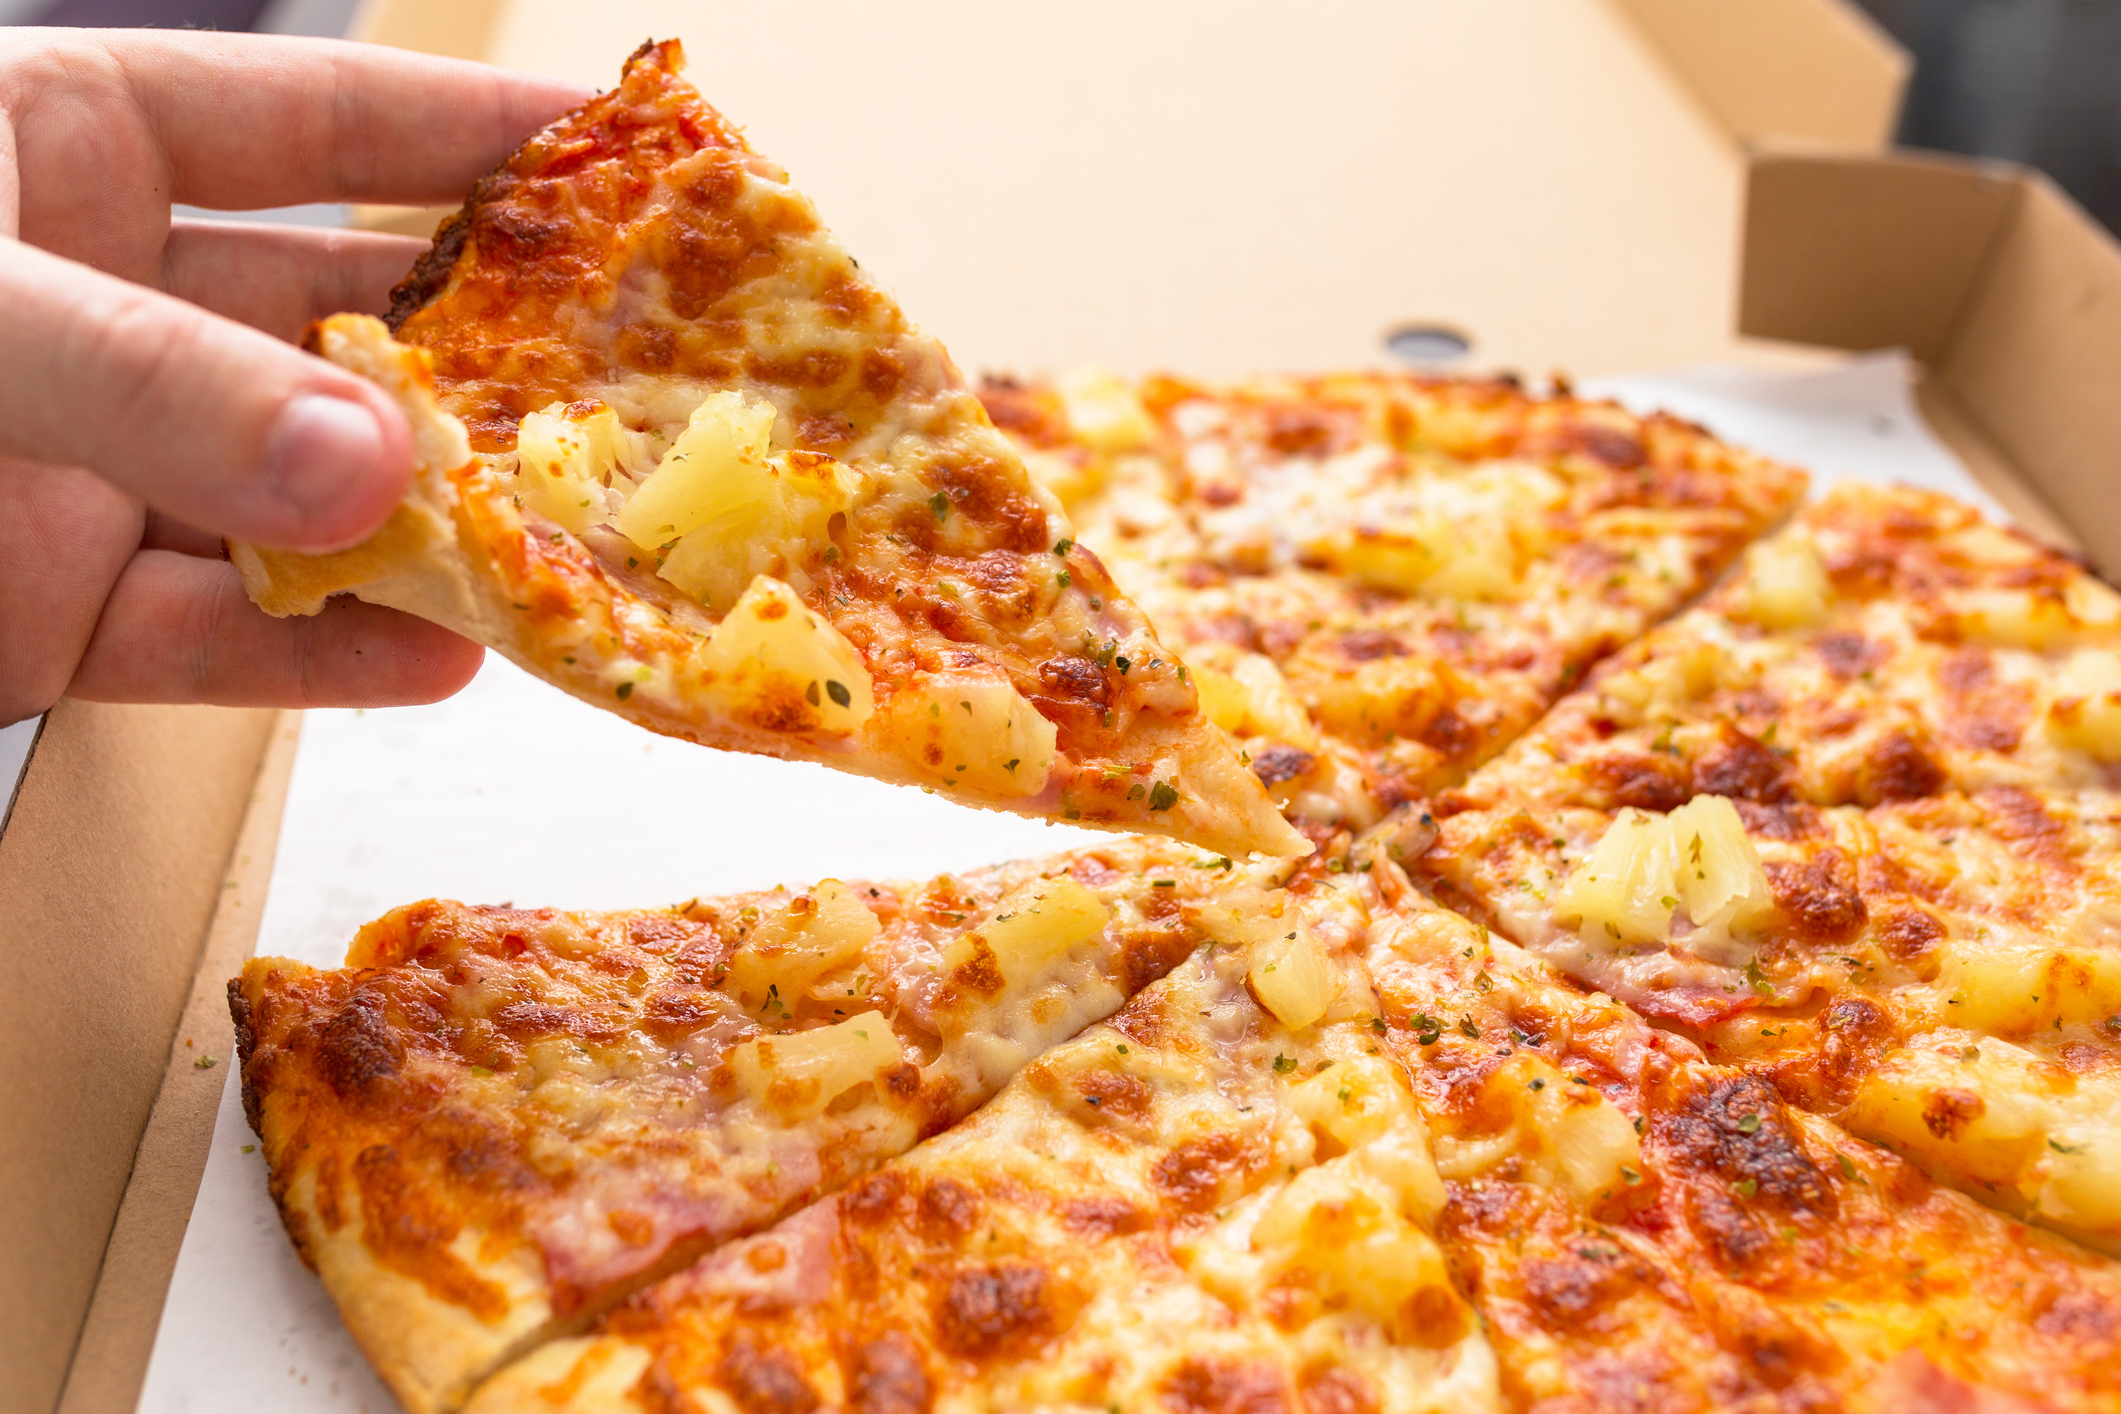 Hand holding a slice of pizza with pineapple and ham toppings, taken from an open pizza box